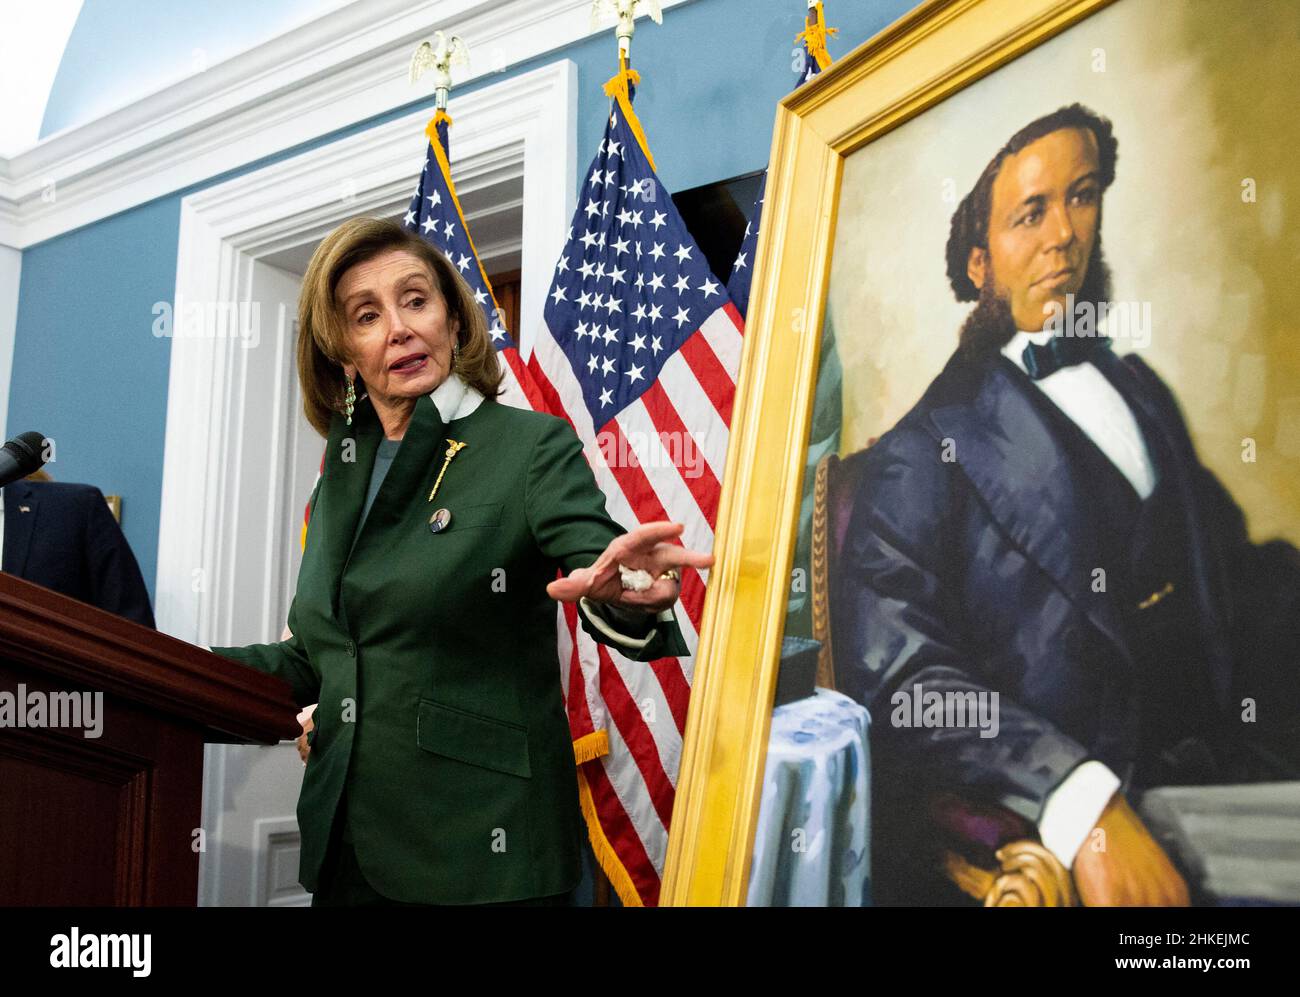 United States Speaker of the House Nancy Pelosi gestures beside a portrait of Joseph H. Rainey, during an unveiling ceremony for the Joseph H. Rainey Room, on Capitol Hill in Washington, DC, USA, February 3, 2022. Rainey was the first black person to serve in the United States House of Representatives. Photo by Michael Reynolds/Pool/ABACAPRESS.COM Stock Photo